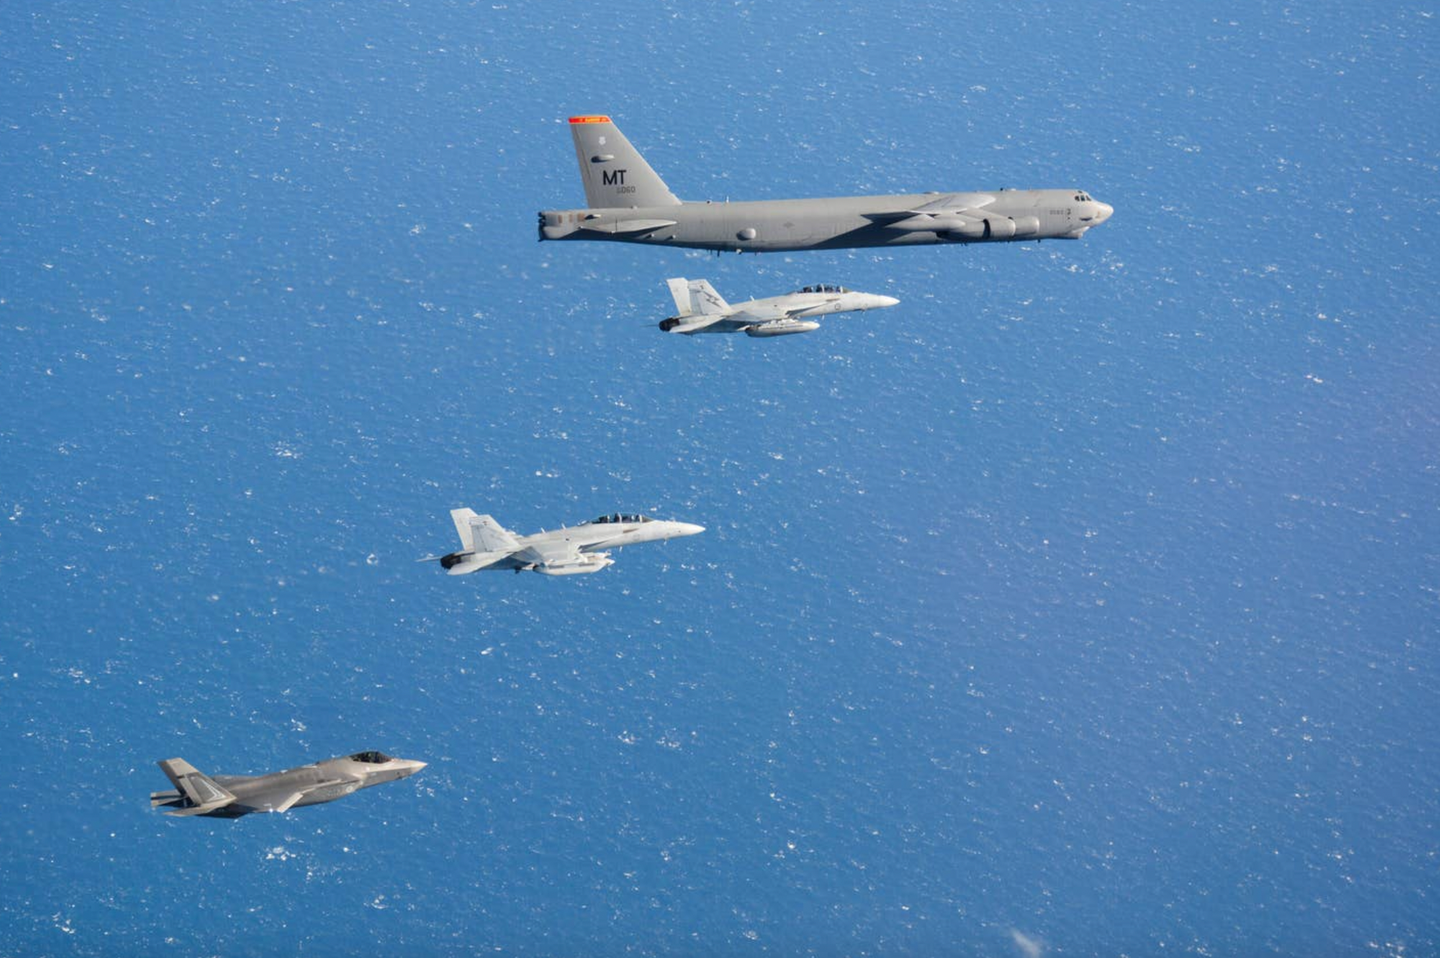 A RAAF F-35A, EA-18G Growler, and F/A-18F Super Hornet fly alongside a U.S. Air Force B-52H from the 23rd Expeditionary Bomb Squadron based at Guam during Exercise Talisman Sabre 21.&nbsp;<em>Australian Department of Defense</em>